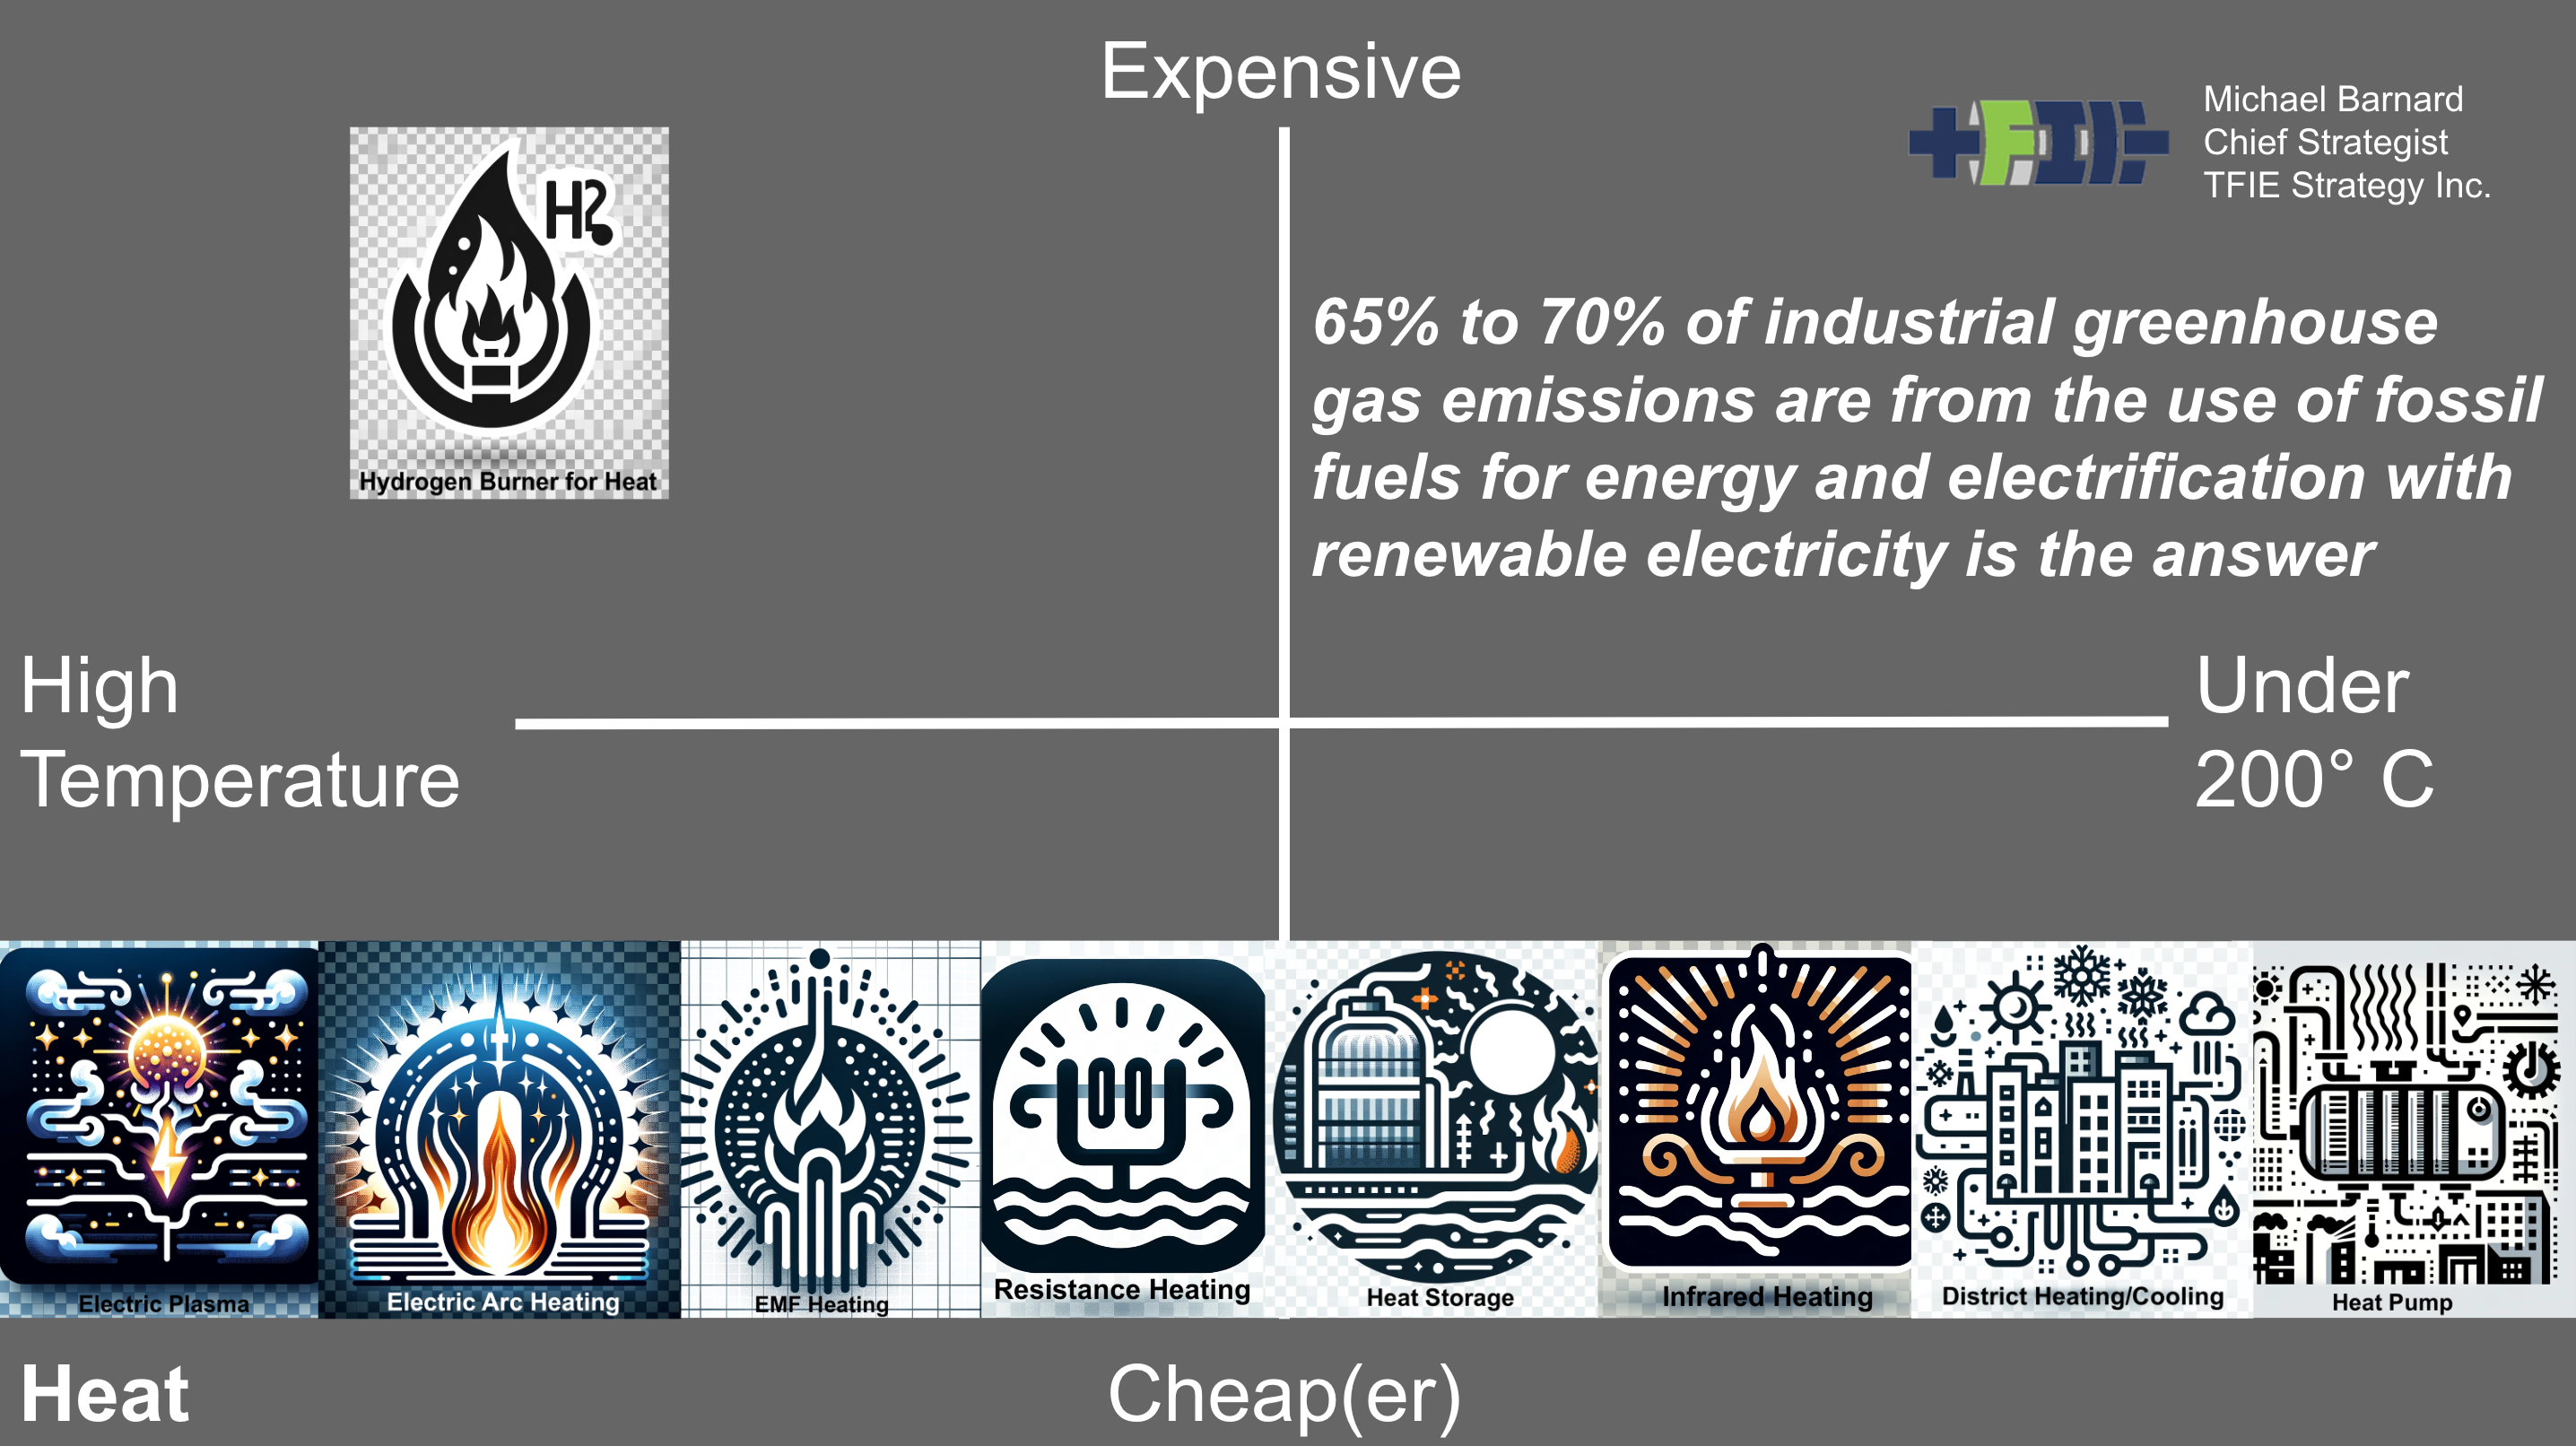 Slide from presenting on decarbonizing industry for ISGF seminar series by Michael Barnard, TFIE Strategy Inc